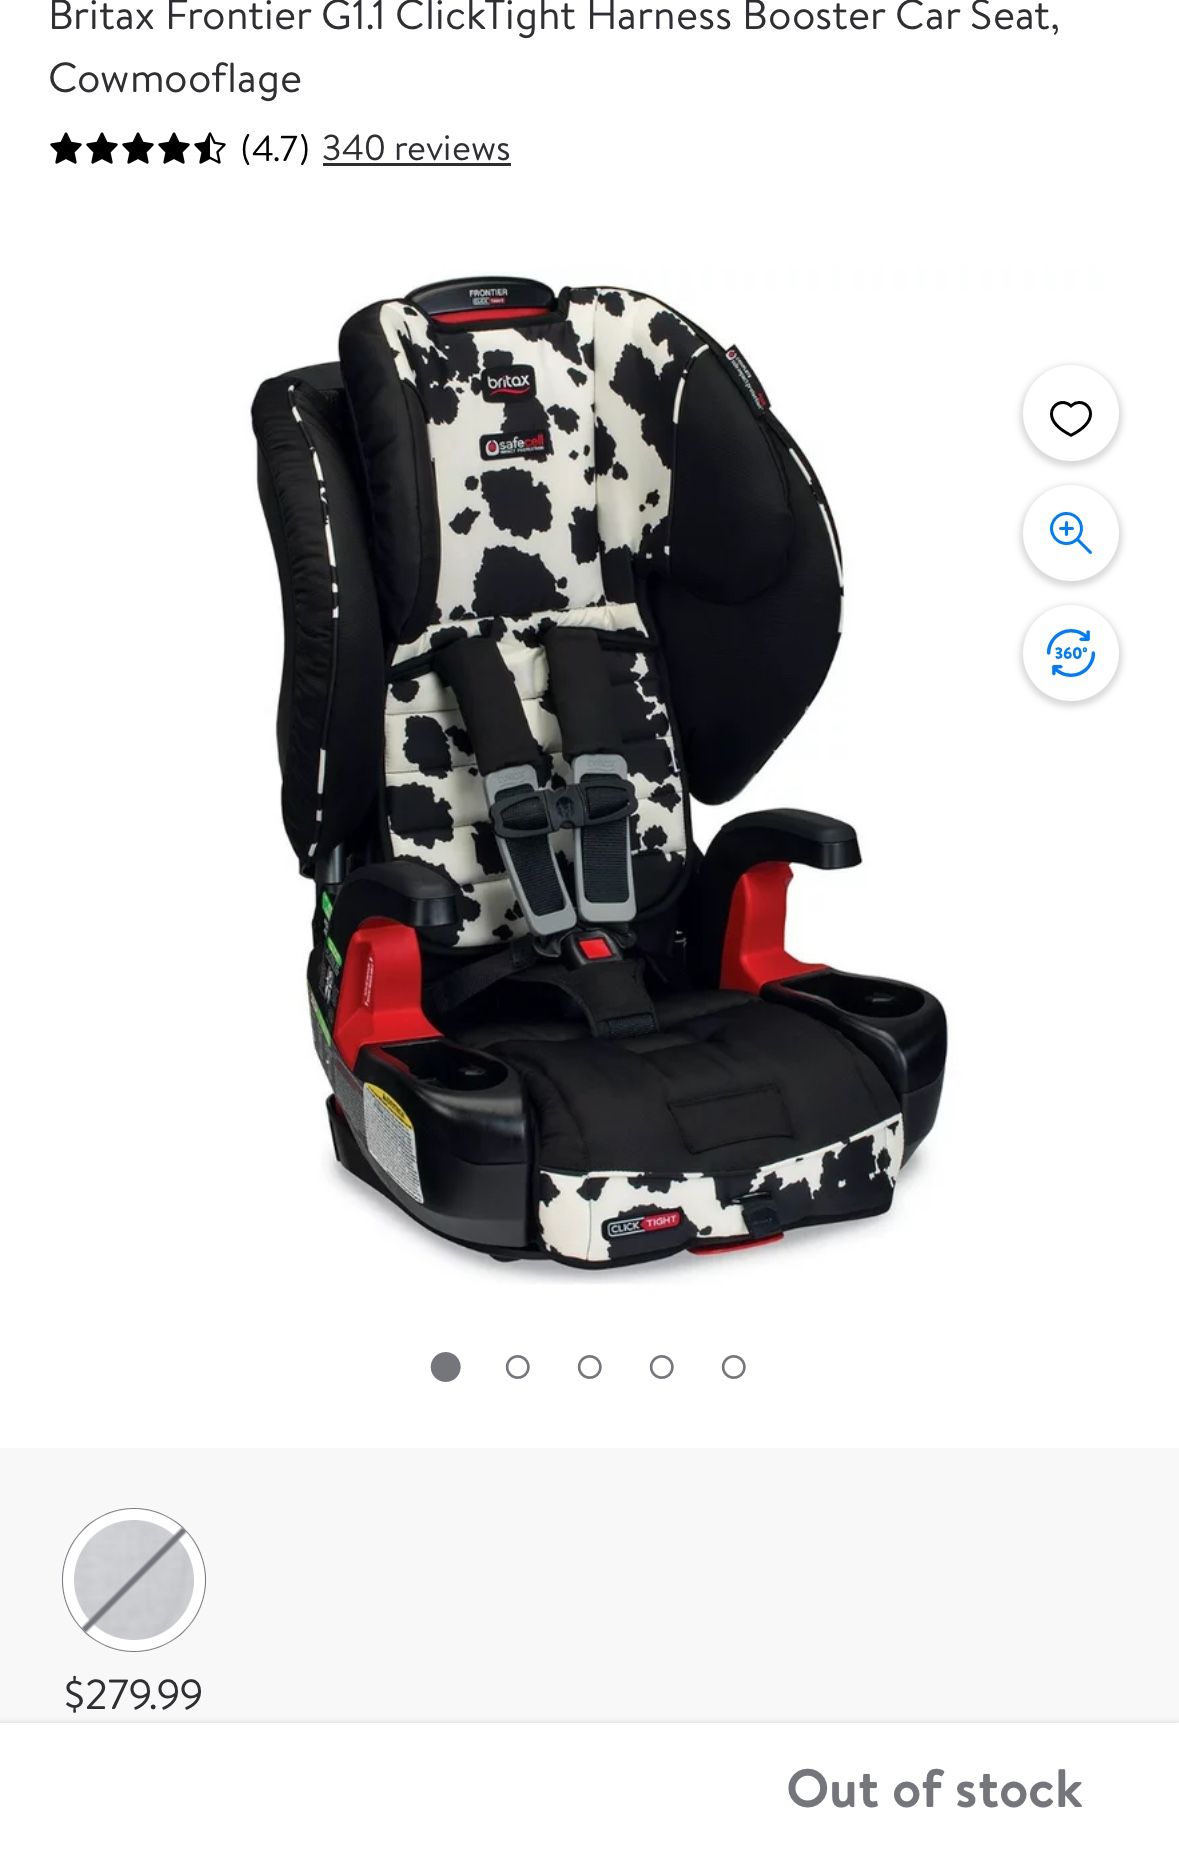 Britax Frontier G1.1 ClickTight Harness Booster Car seat, Cowmooflage